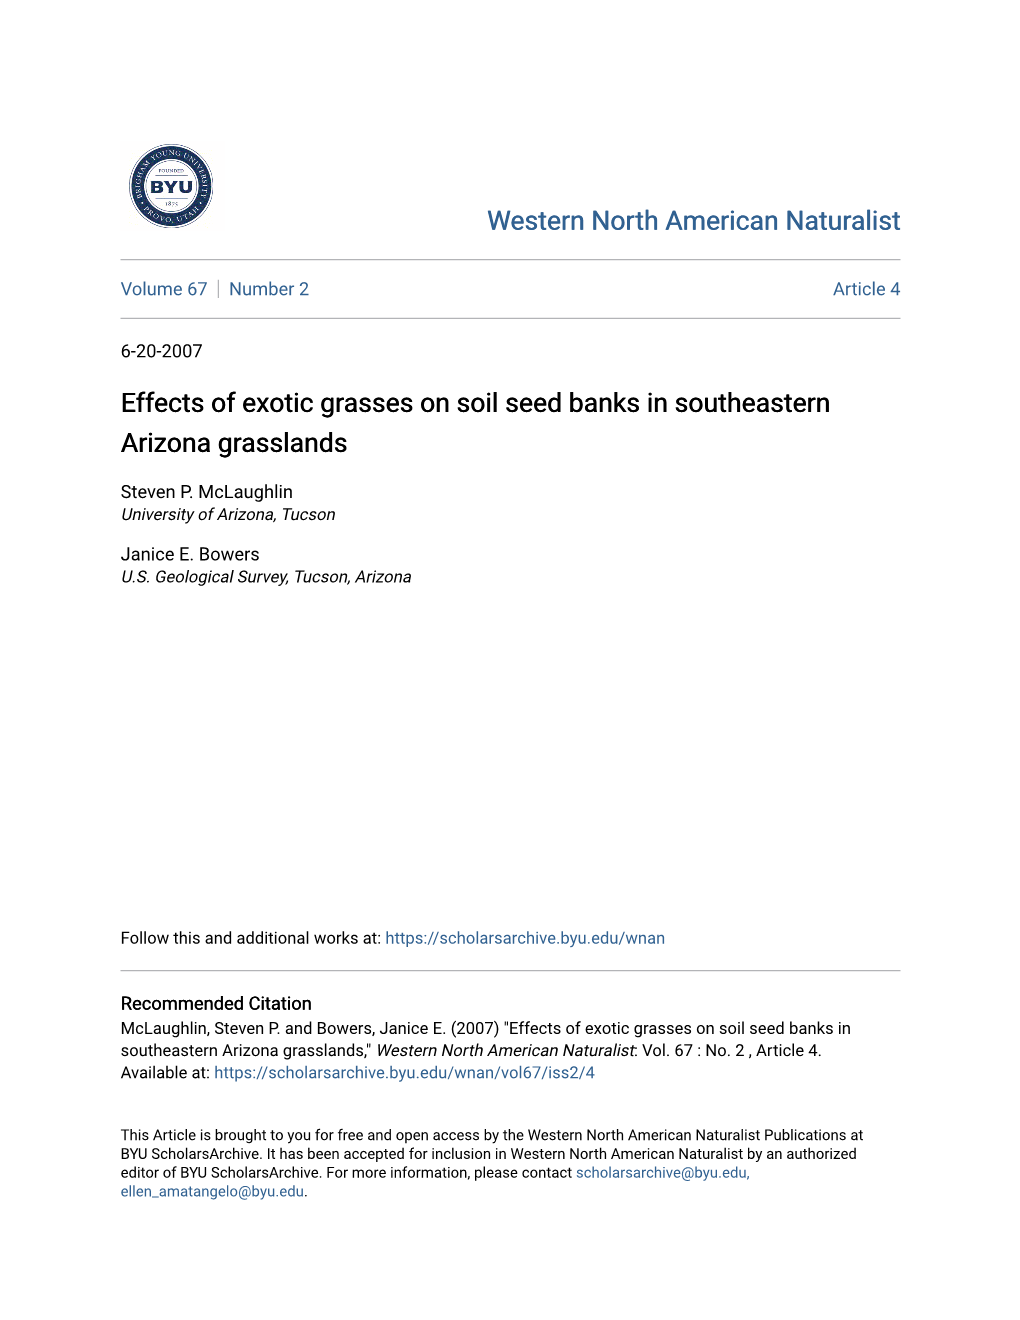 Effects of Exotic Grasses on Soil Seed Banks in Southeastern Arizona Grasslands